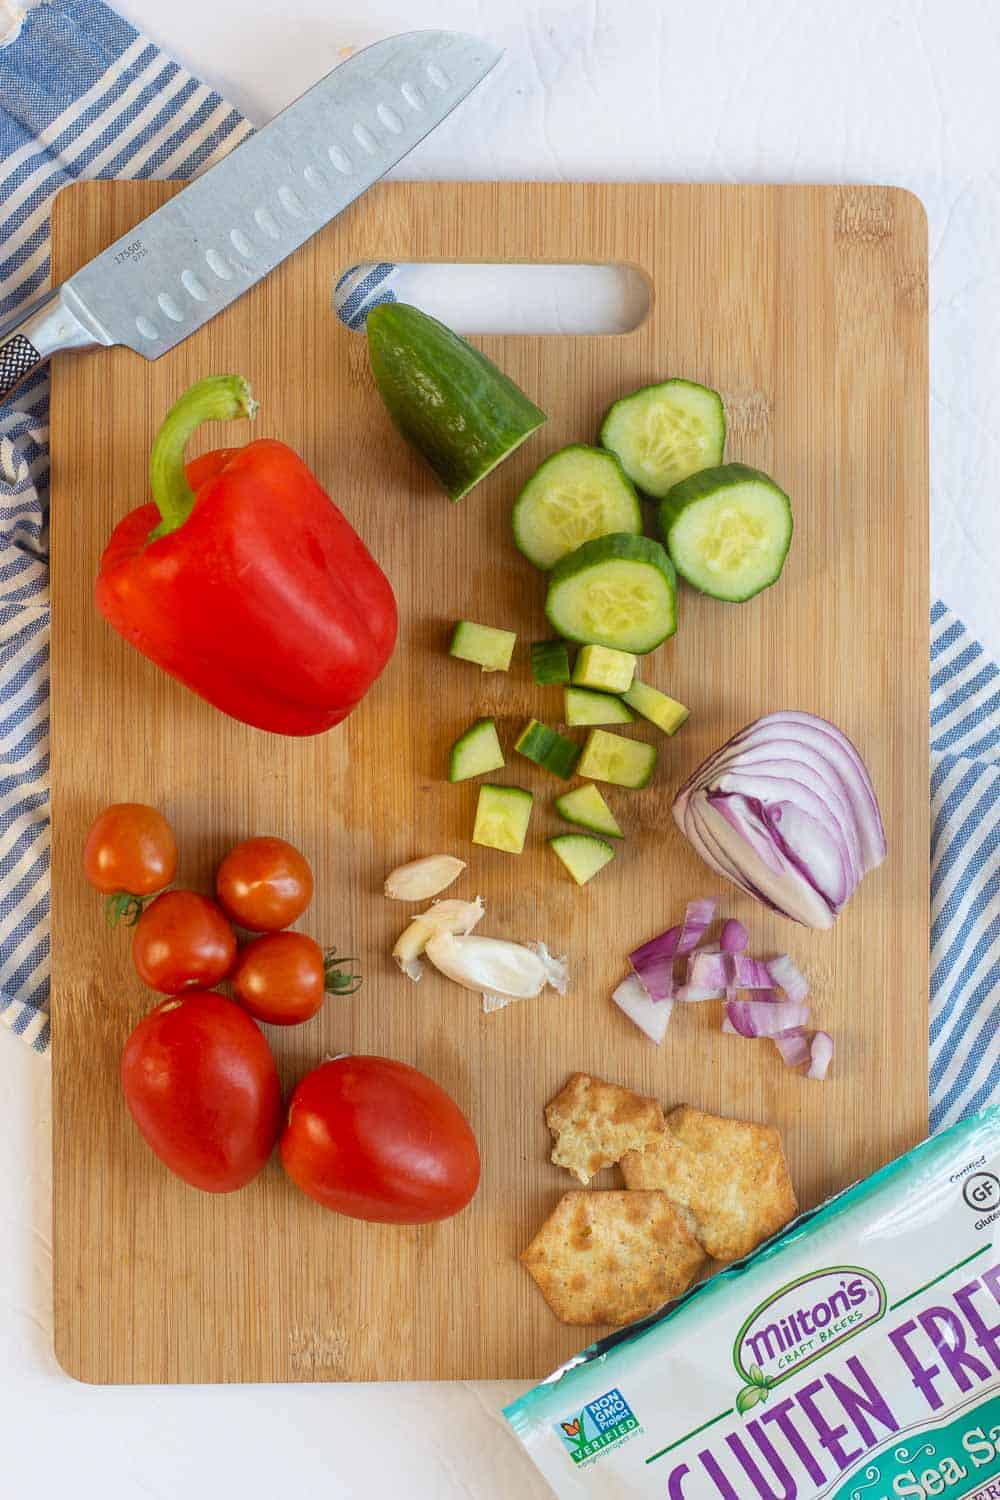 Wooden cutting board with tomatoes, red pepper, cucumber, red onion and crackers